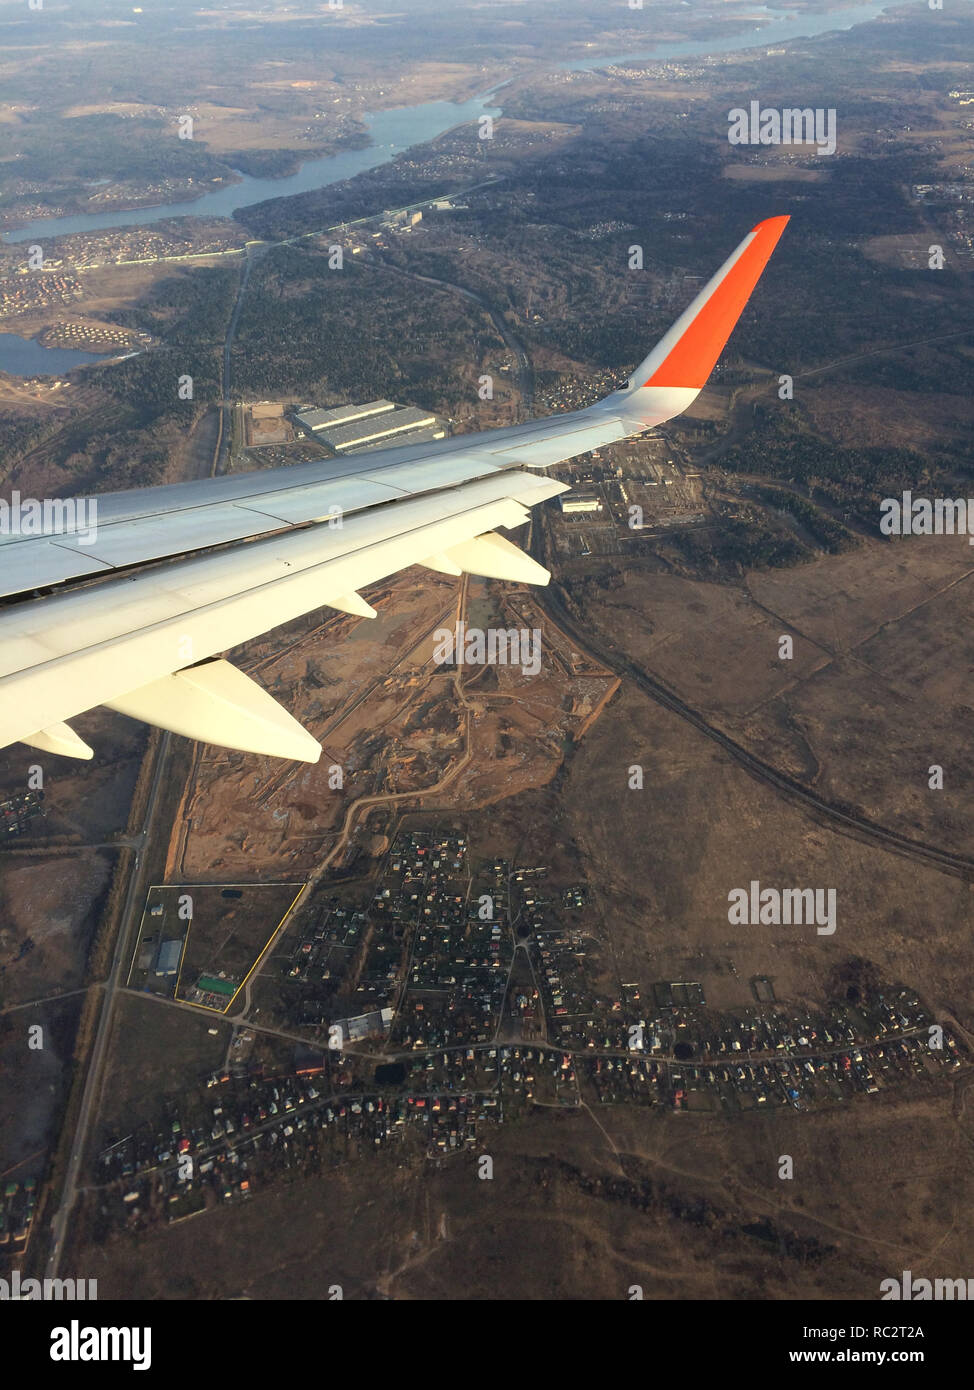 Village of Beliy Rast next to Iksha urban locality near Moscow, Russia. Aerial view pictured from the Airbus A321 aircraft. Stock Photo